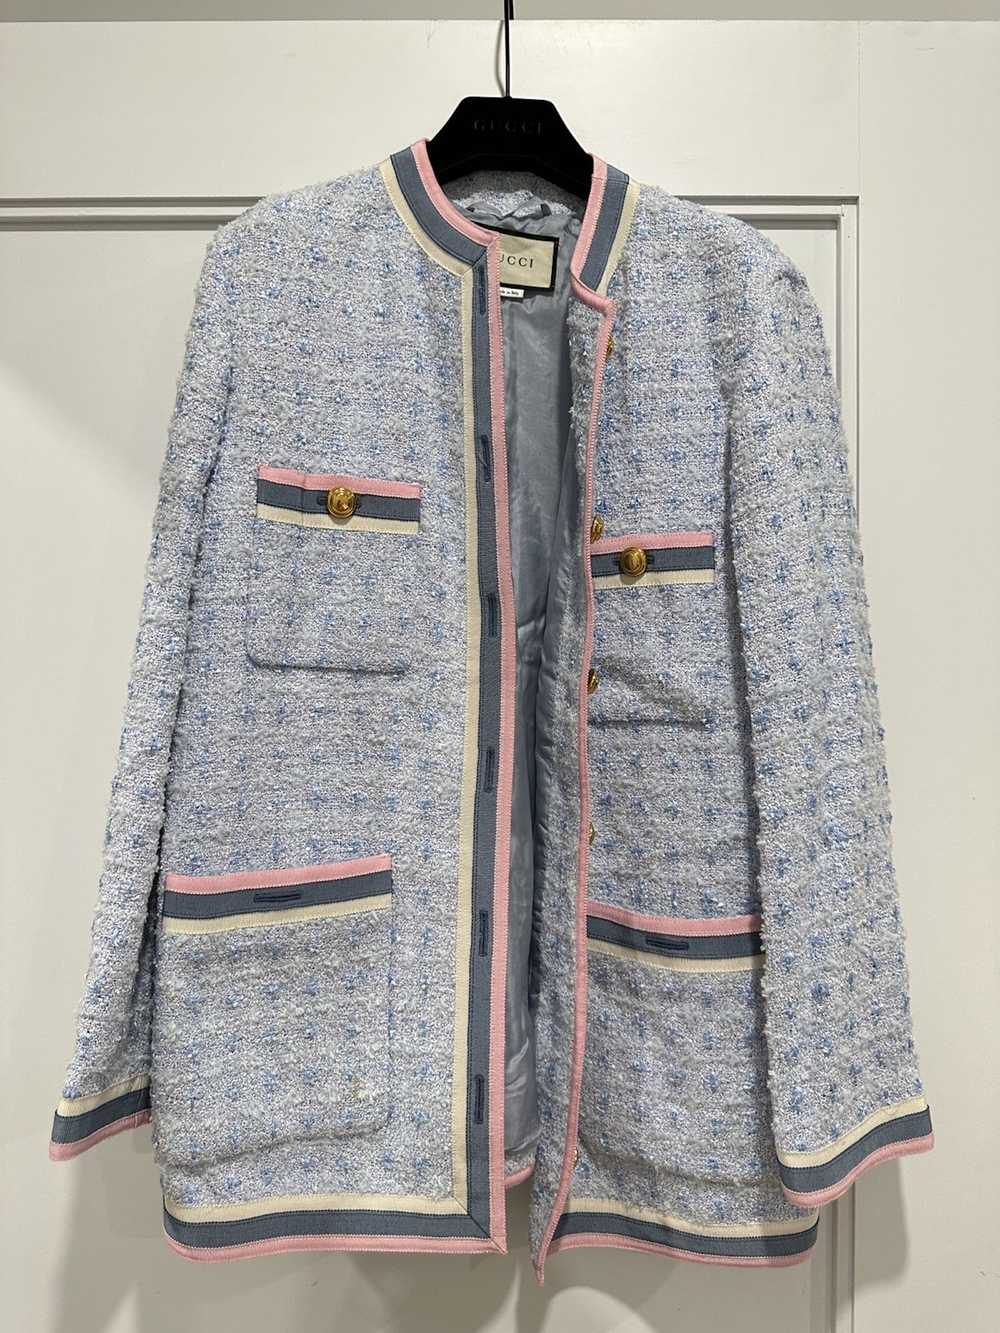 Gucci Gucci Tweed Jacket in Light Blue - image 1